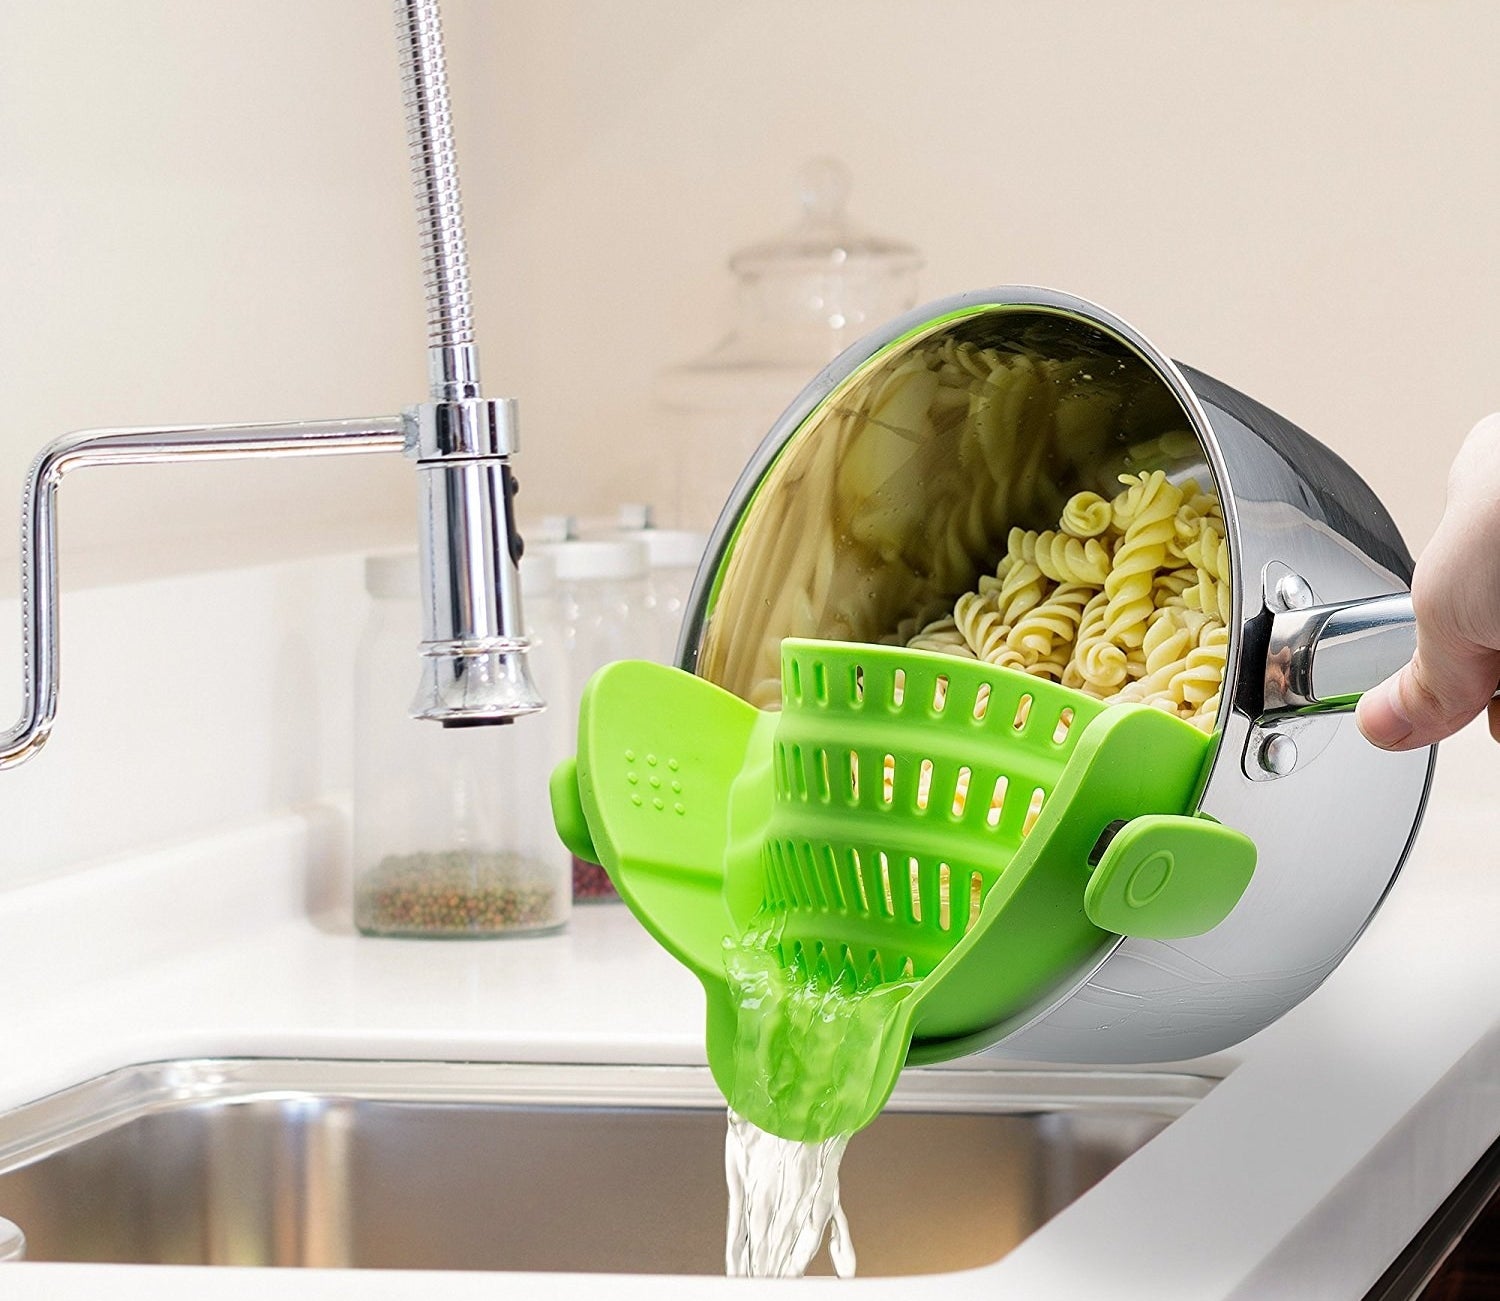 Green Kitchen Gadgets Are Trending, and Here Are 9 of Our